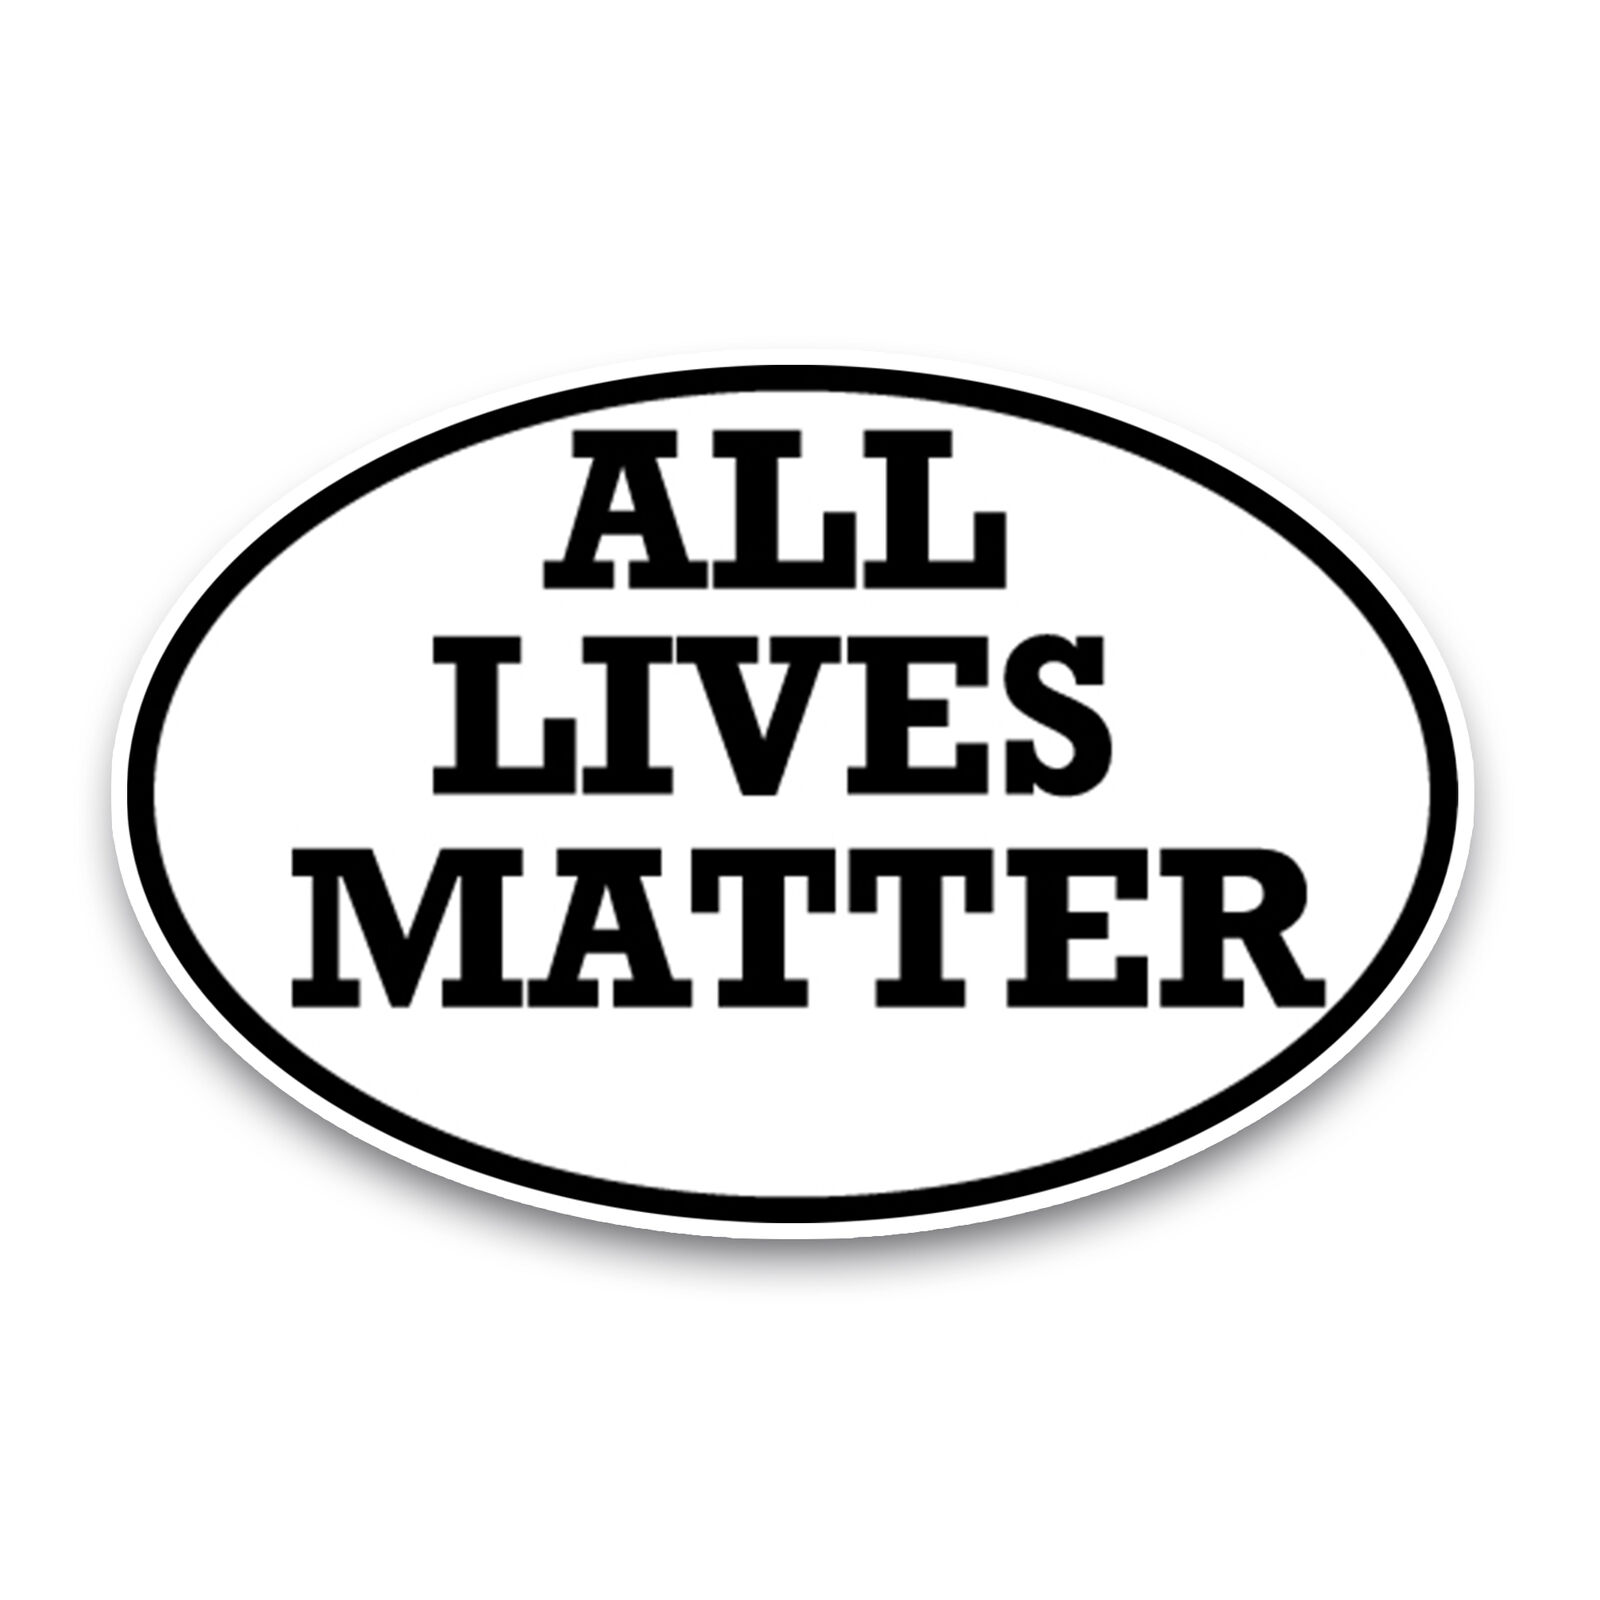 All Lives Matter Oval Magnet Decal, 4x6 Inches, Automotive Magnet